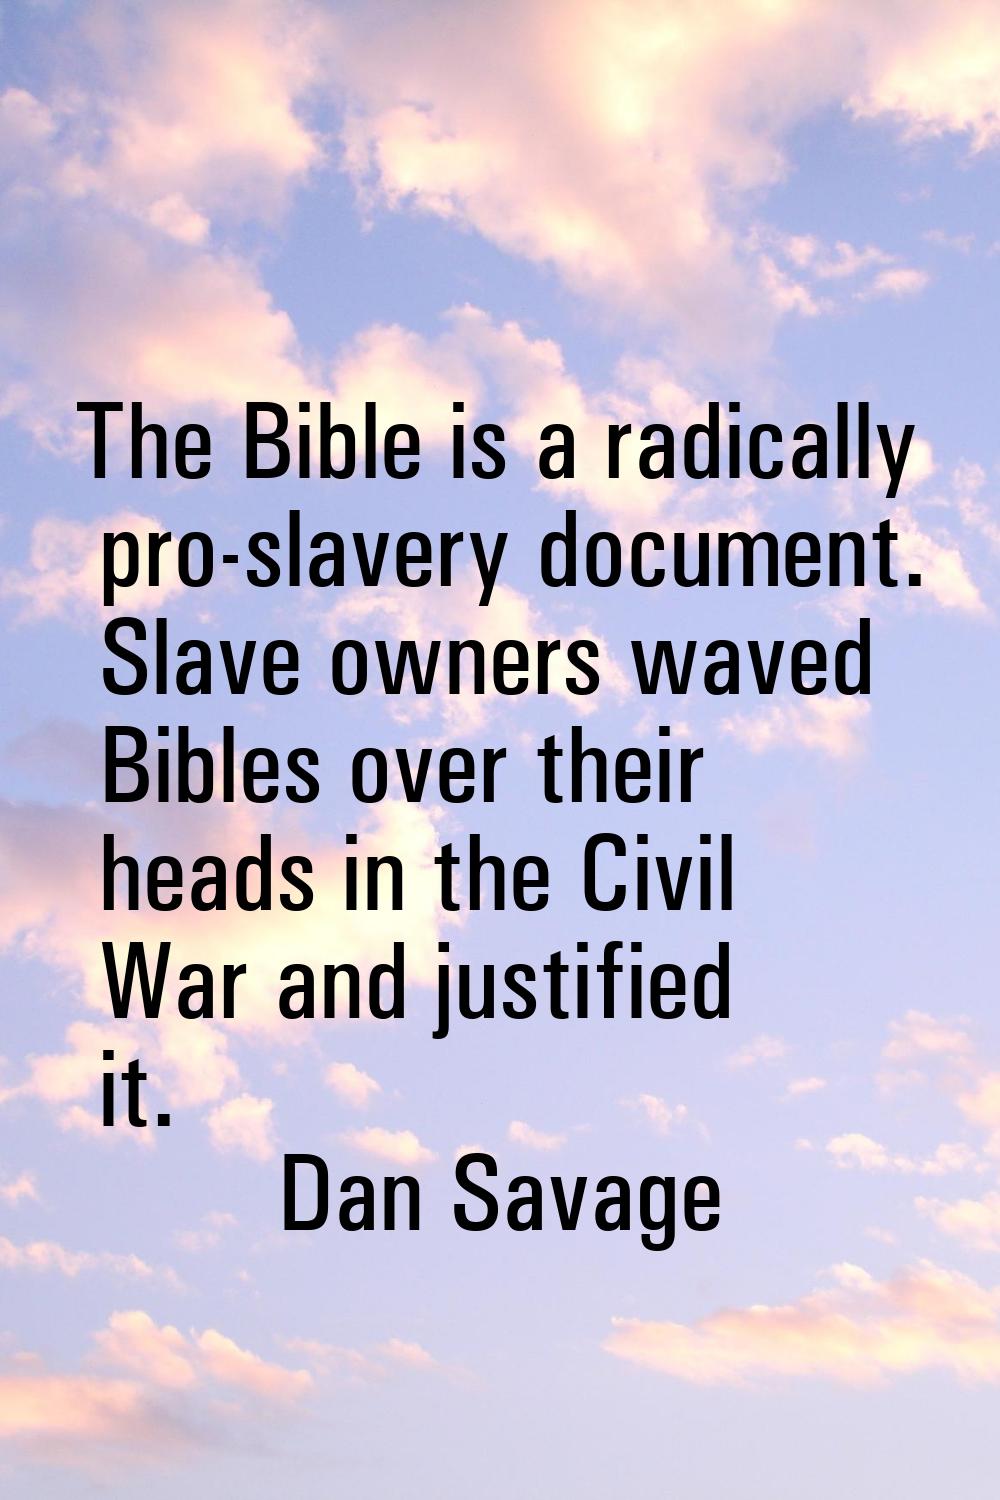 The Bible is a radically pro-slavery document. Slave owners waved Bibles over their heads in the Ci